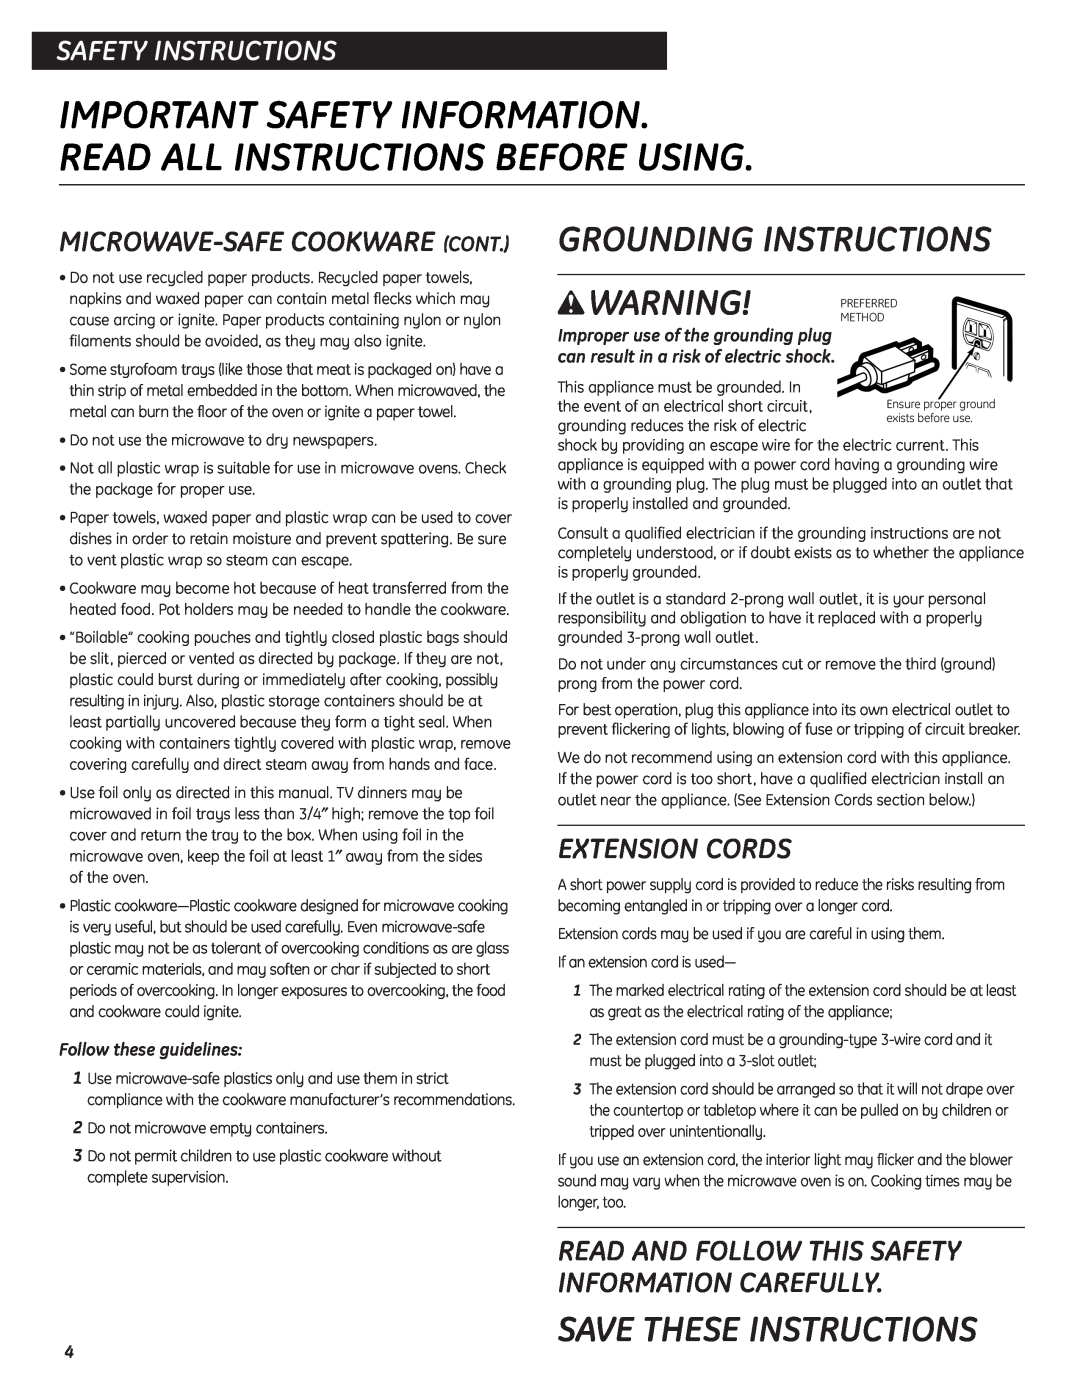 GE JES0734PMRR Grounding Instructions, Extension Cords, Follow these guidelines, Save These Instructions 